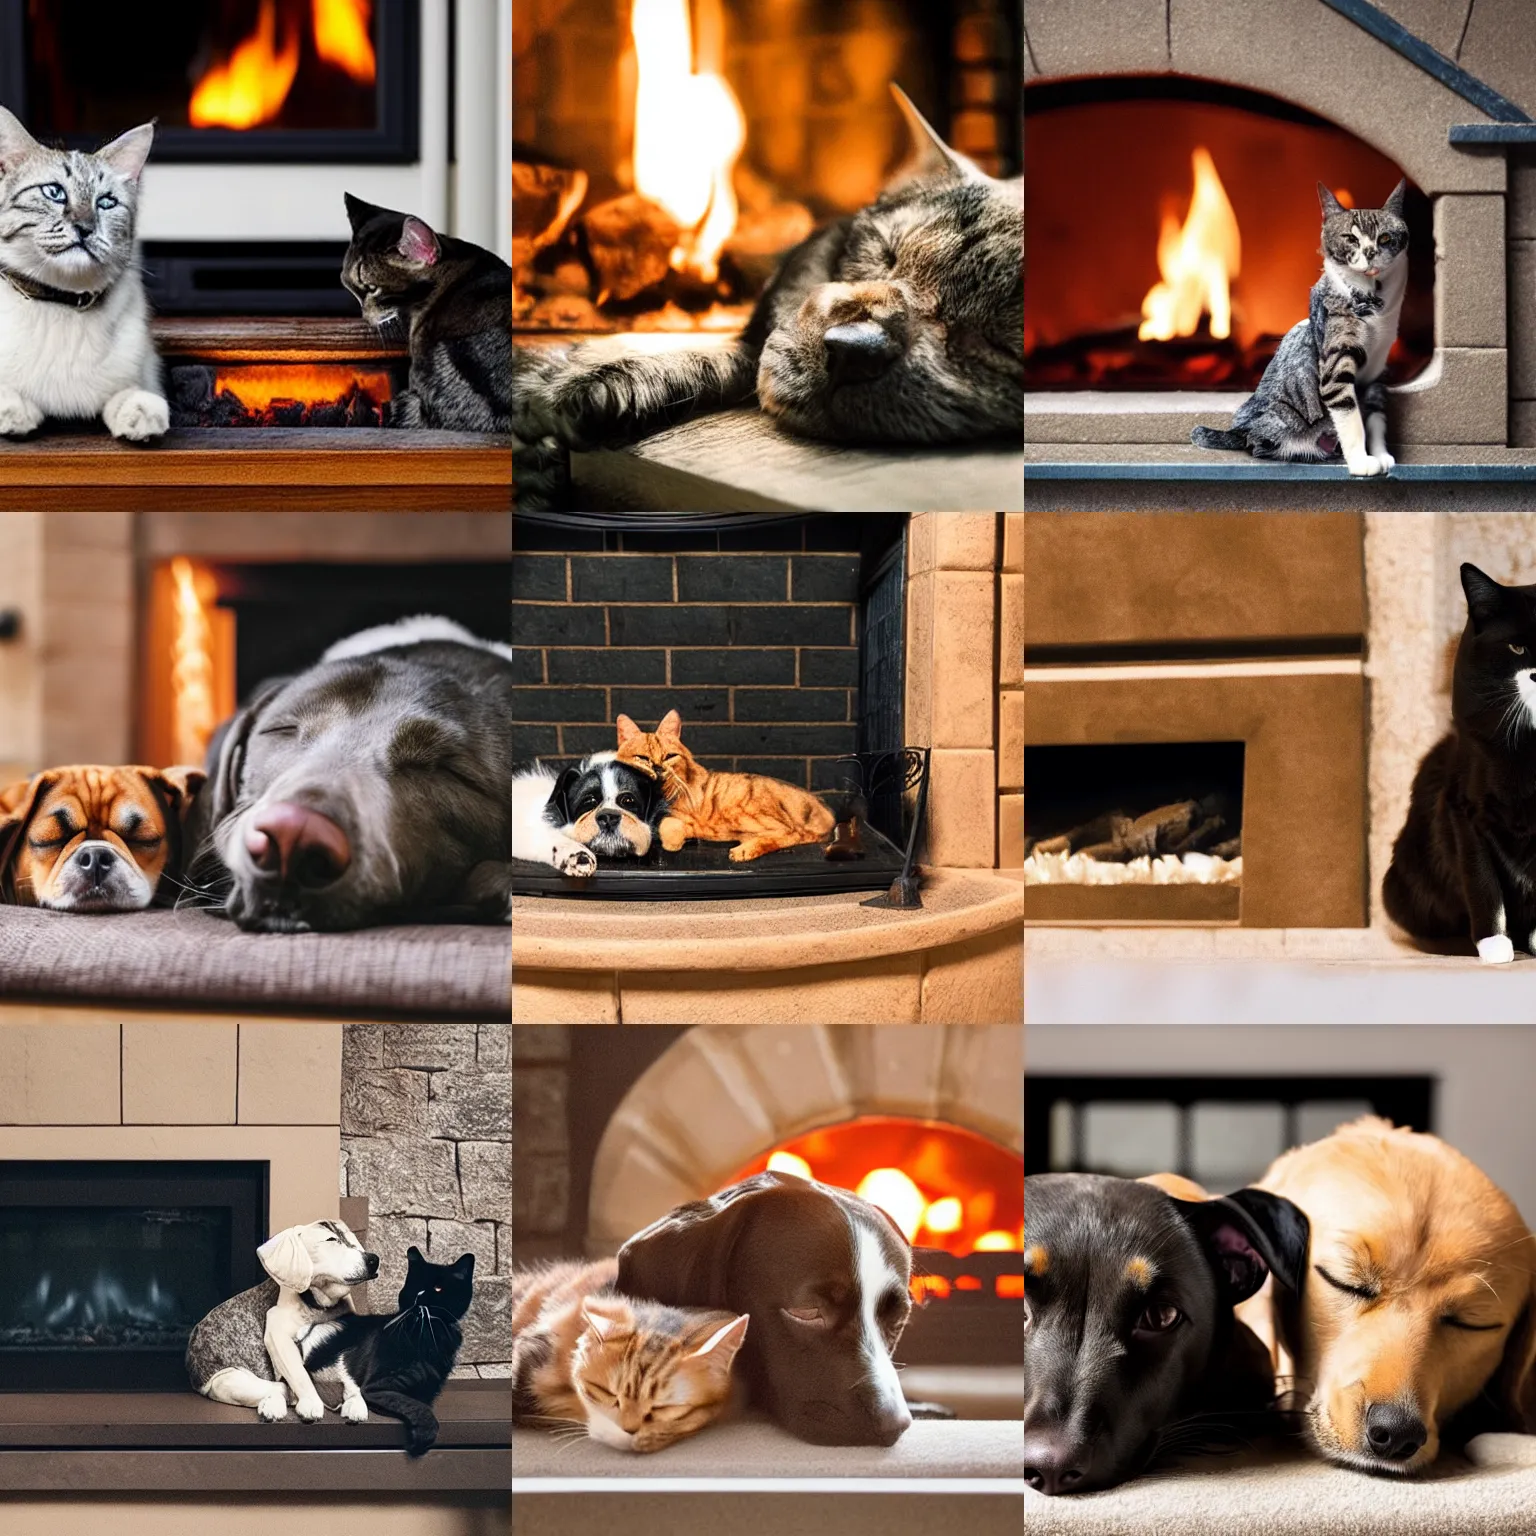 Prompt: photograph of a dog and a cat napping together in front of a fireplace